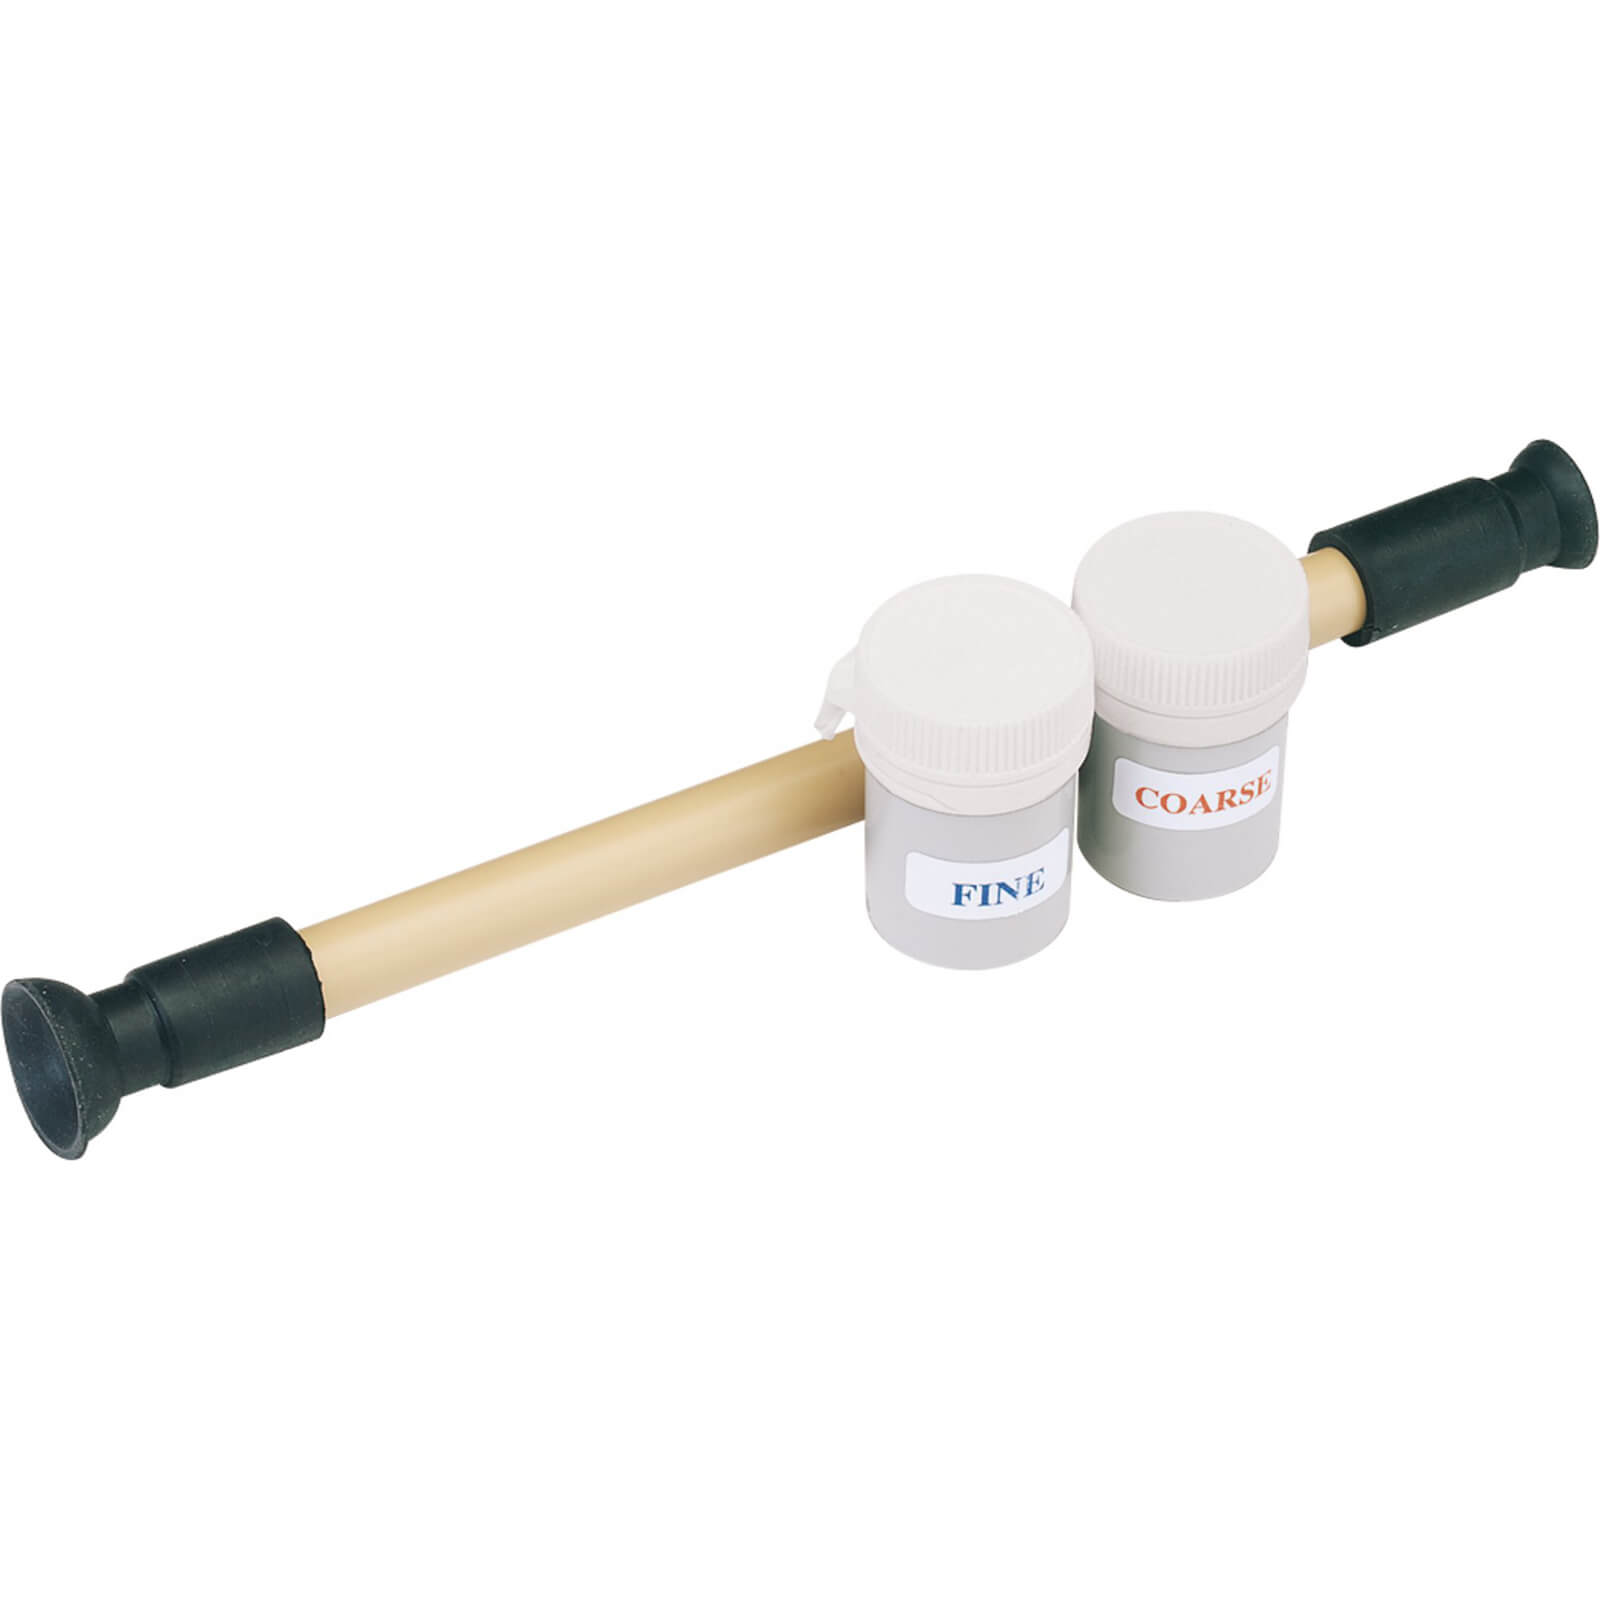 Image of Draper Valve Grinding Stick and Grinding Paste